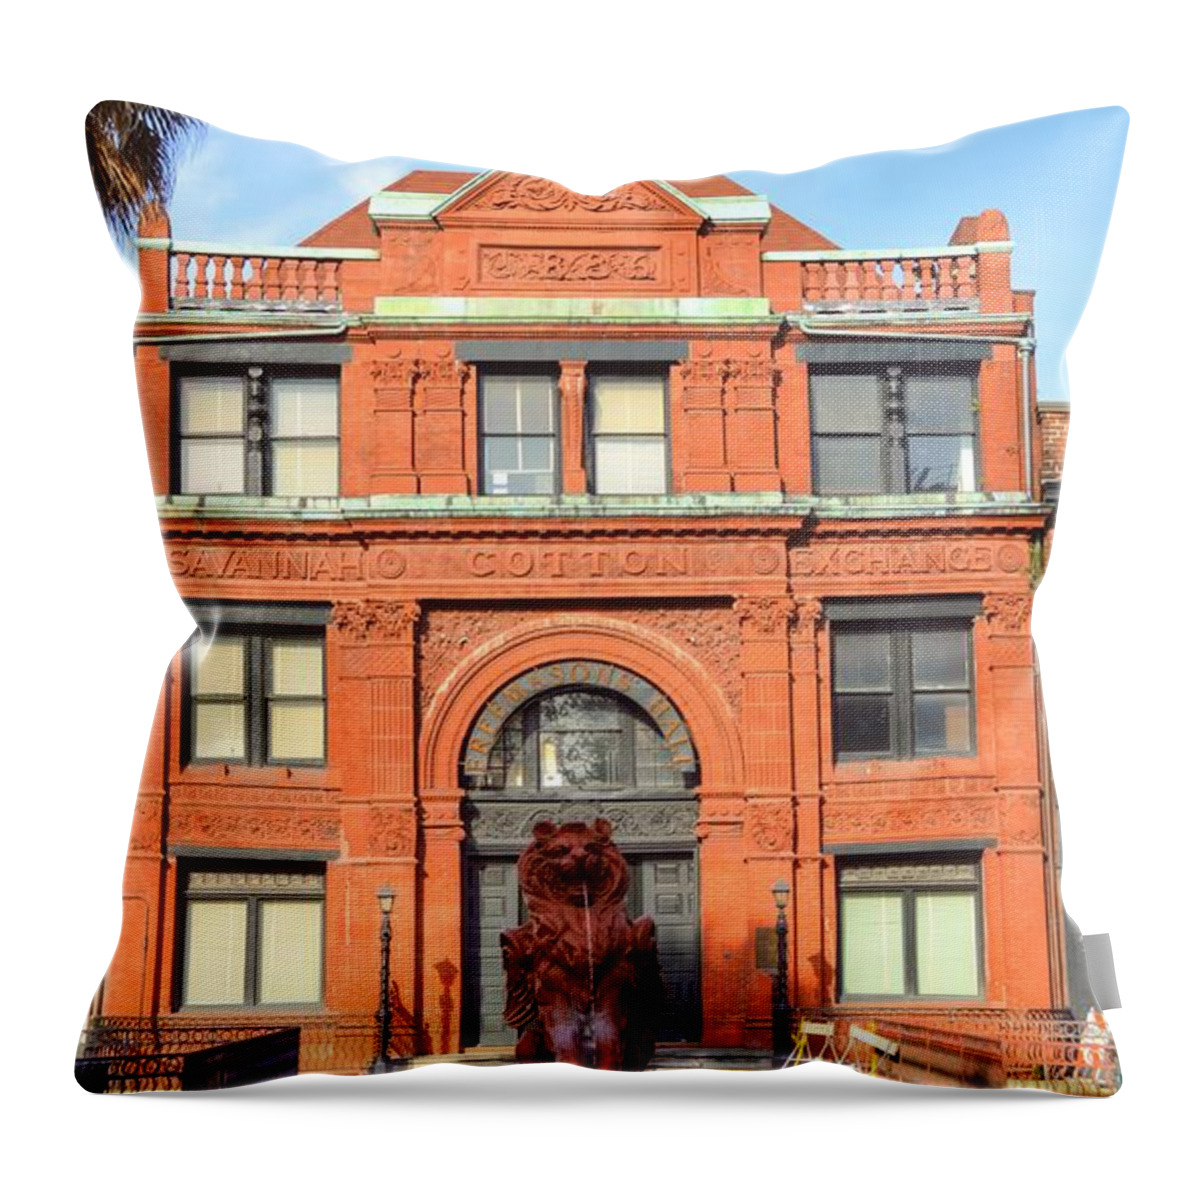 Cotton Exchange Throw Pillow featuring the photograph The Cotton Exchange building by Linda Covino